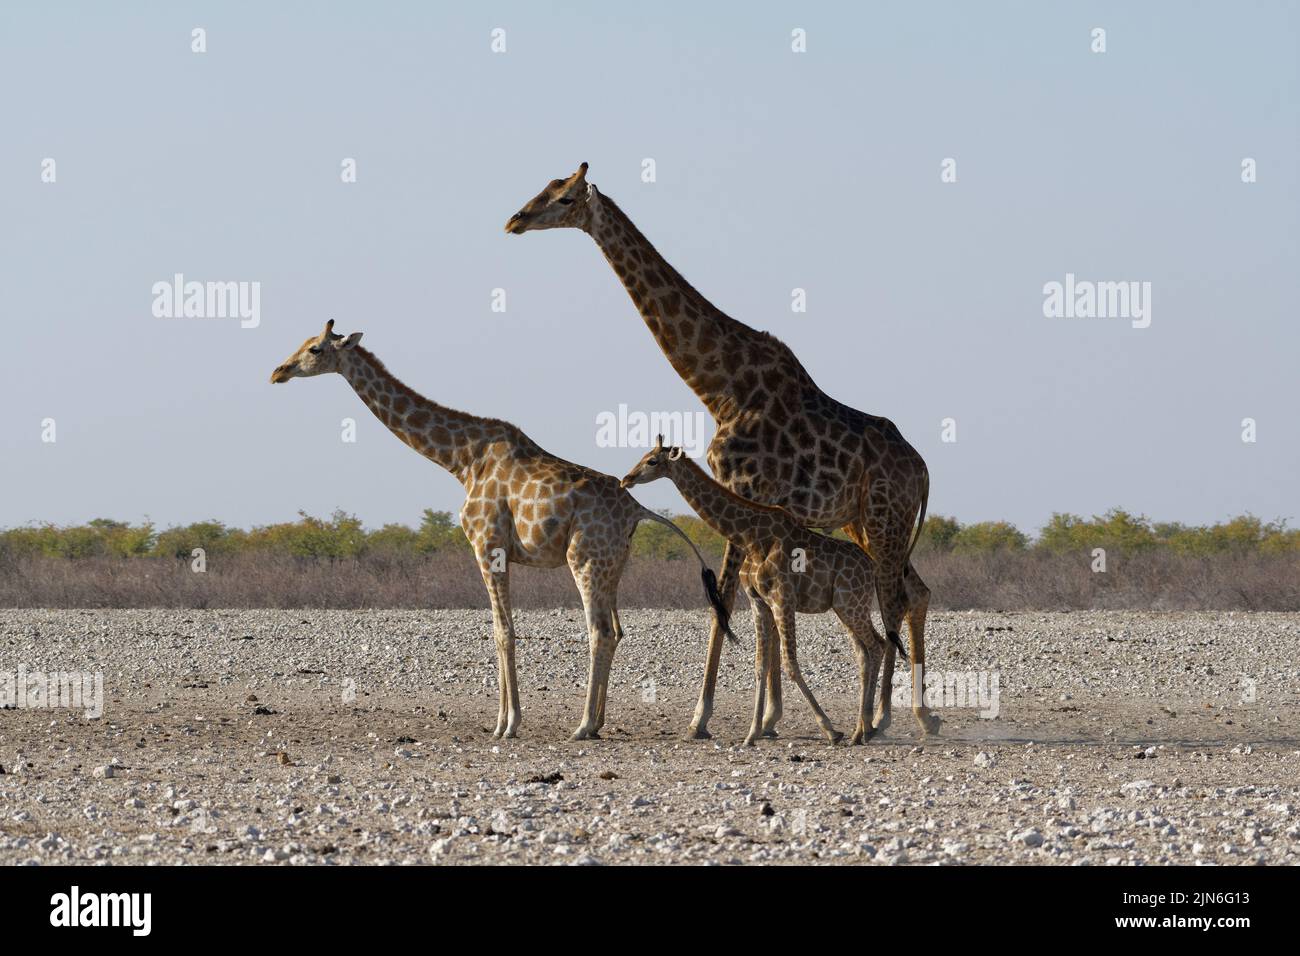 Angolan giraffes (Giraffa camelopardalis angolensis), adult male with young female and foal, on arid ground, alert, Etosha National Park, Namibia Stock Photo